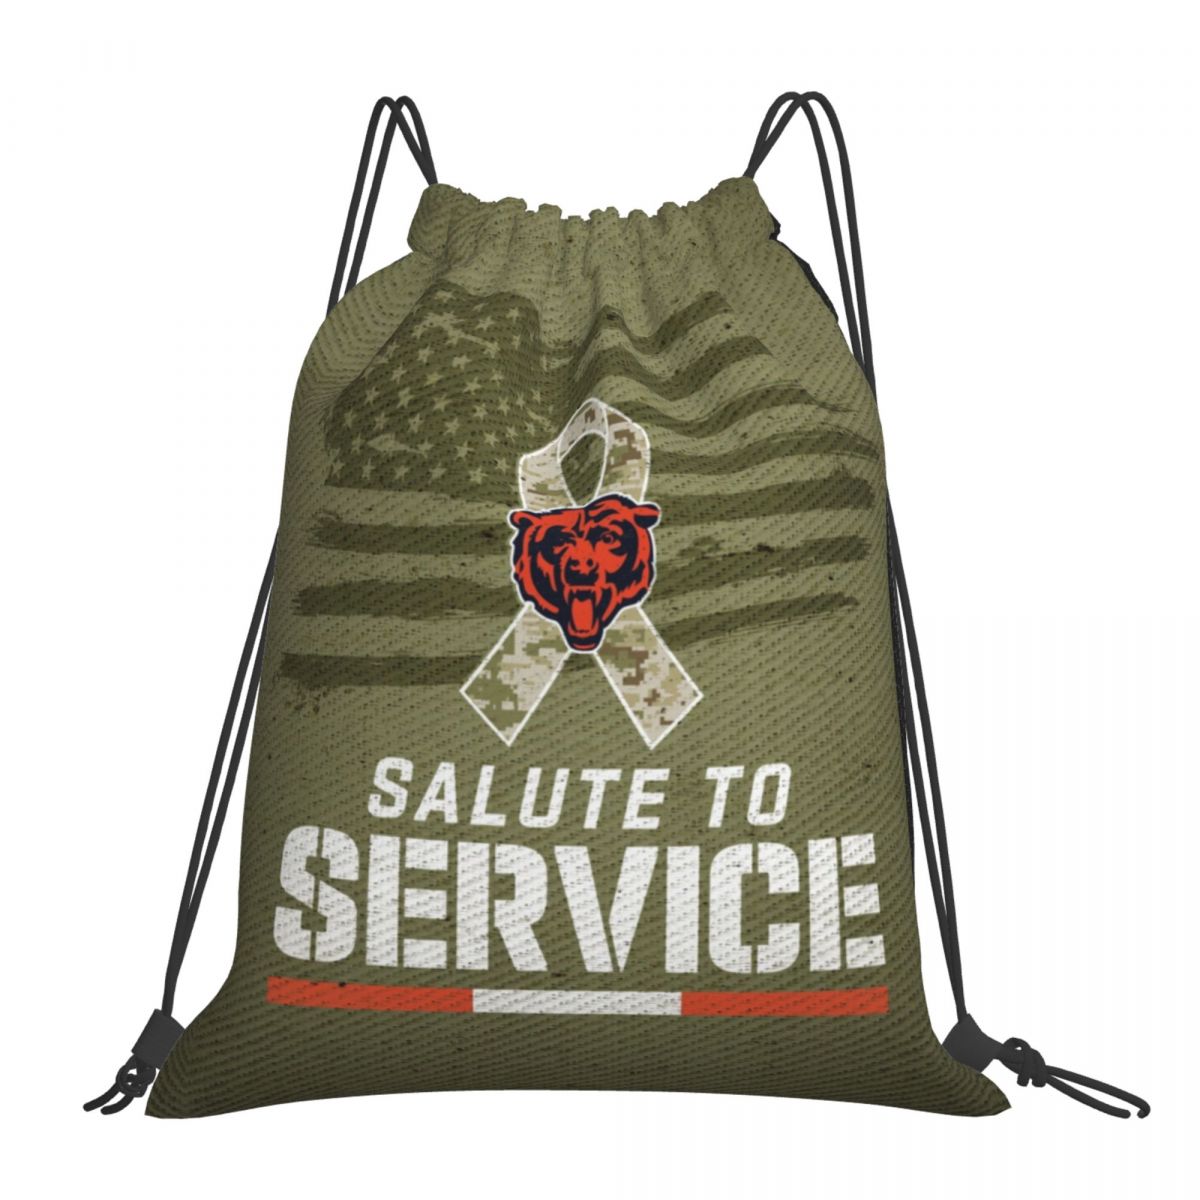 Chicago Bears Salute to Service Drawstring Bags for School Gym